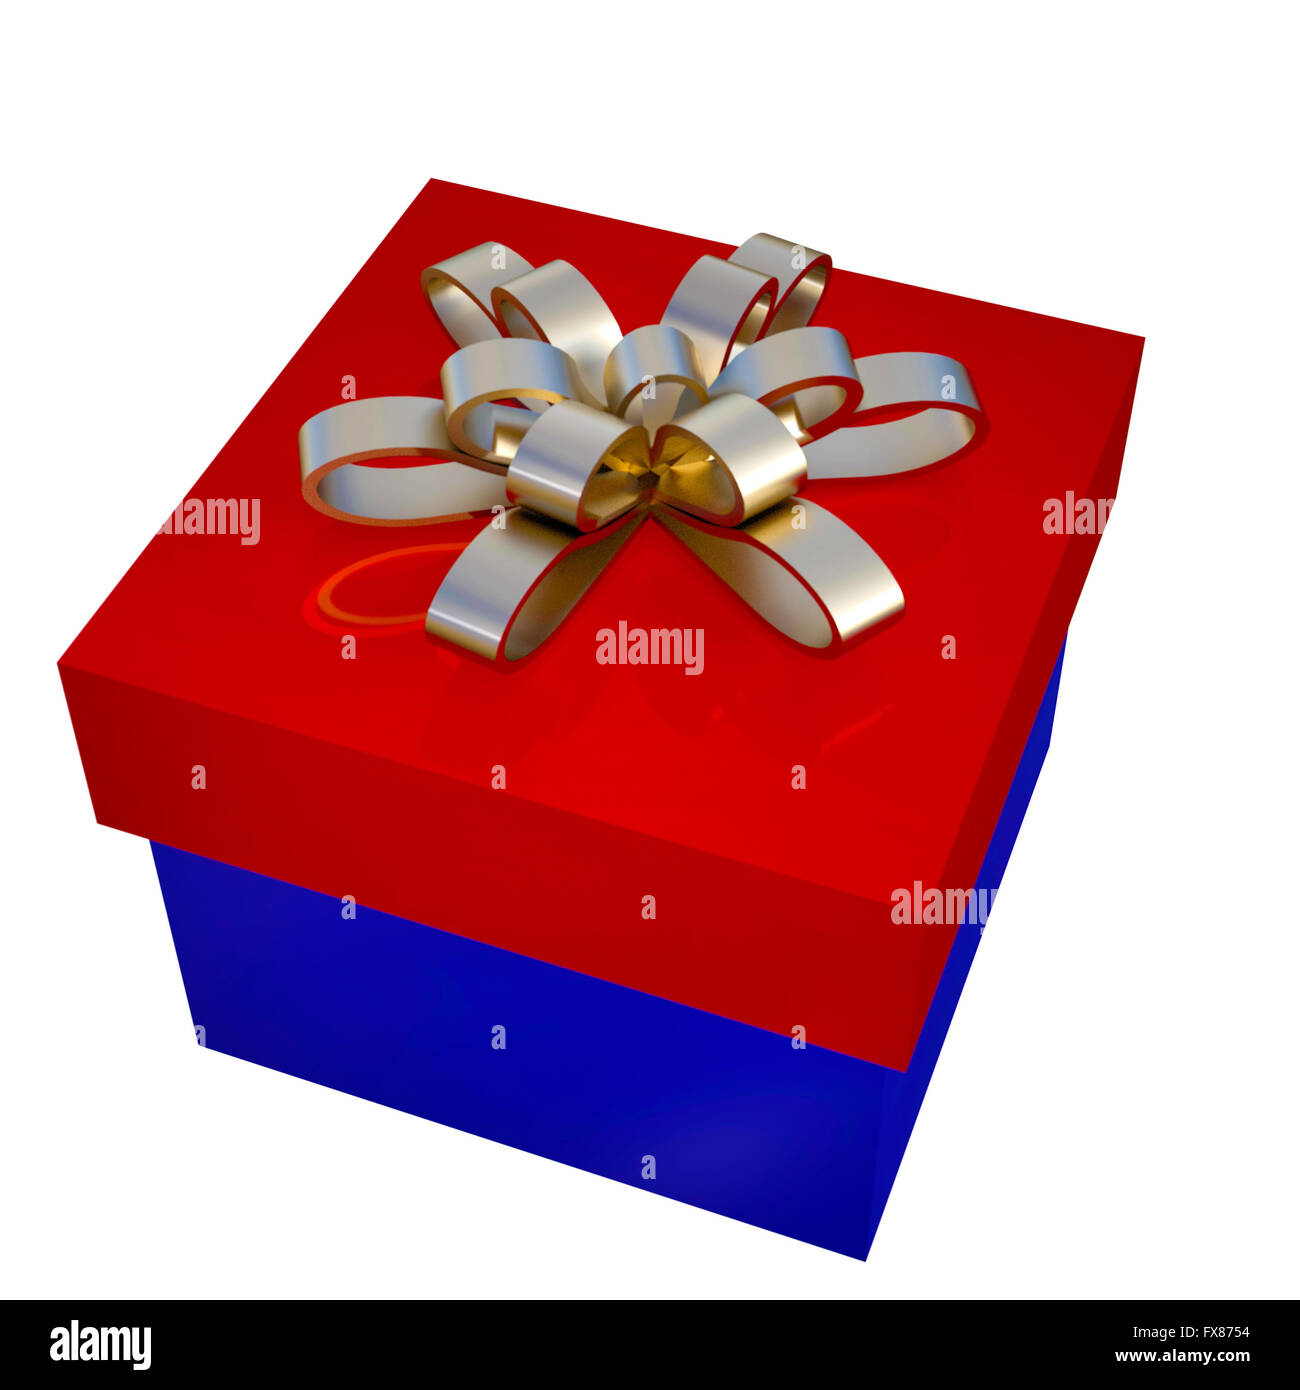 Gift box wrapped in red rose cellophane, decorated with golden